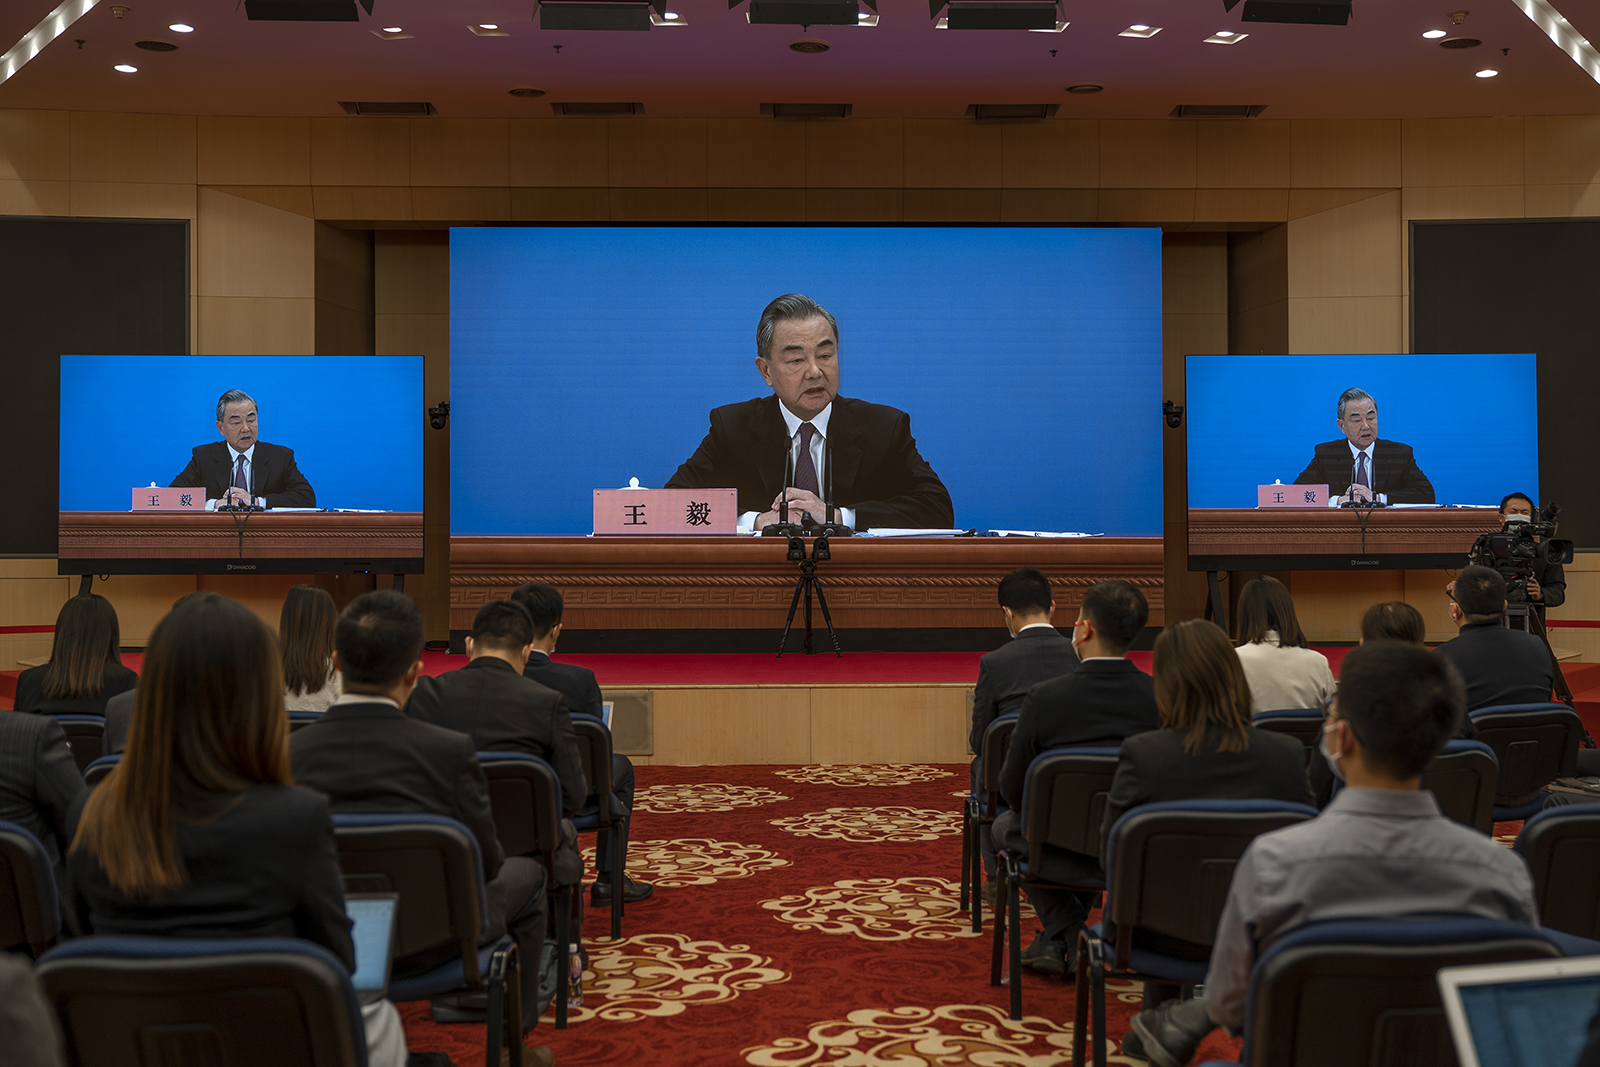 Chinese Foreign Minister Wang Yi is seen on screens during a press conference at the Media Center on March 7, in Beijing, China.